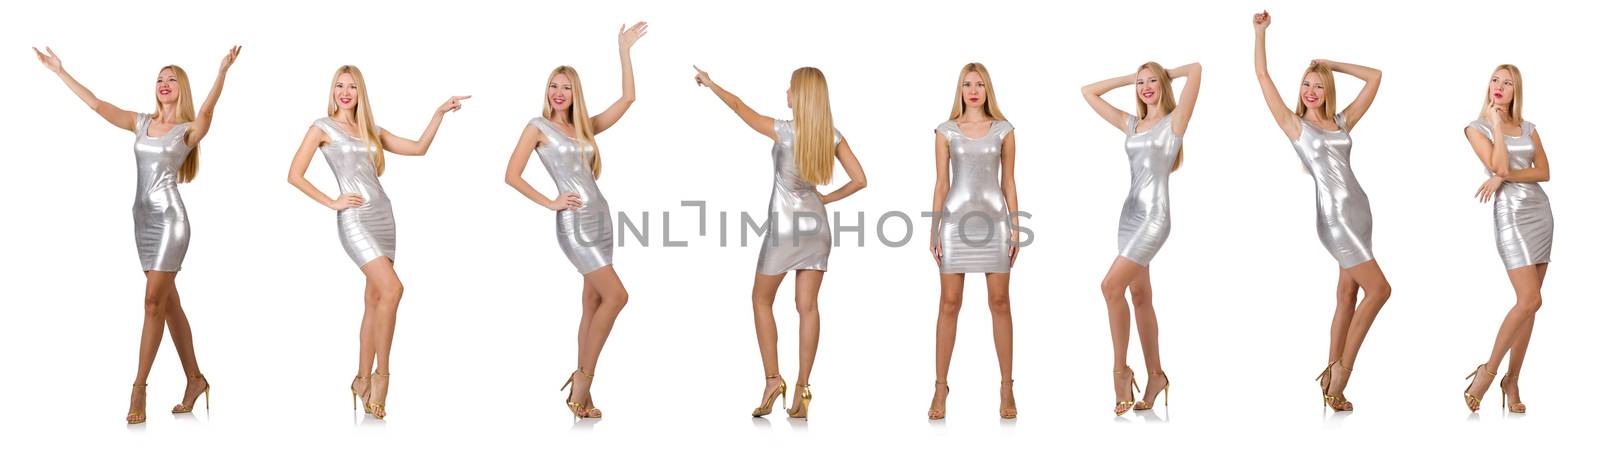 Young woman in silver dress isolated on white